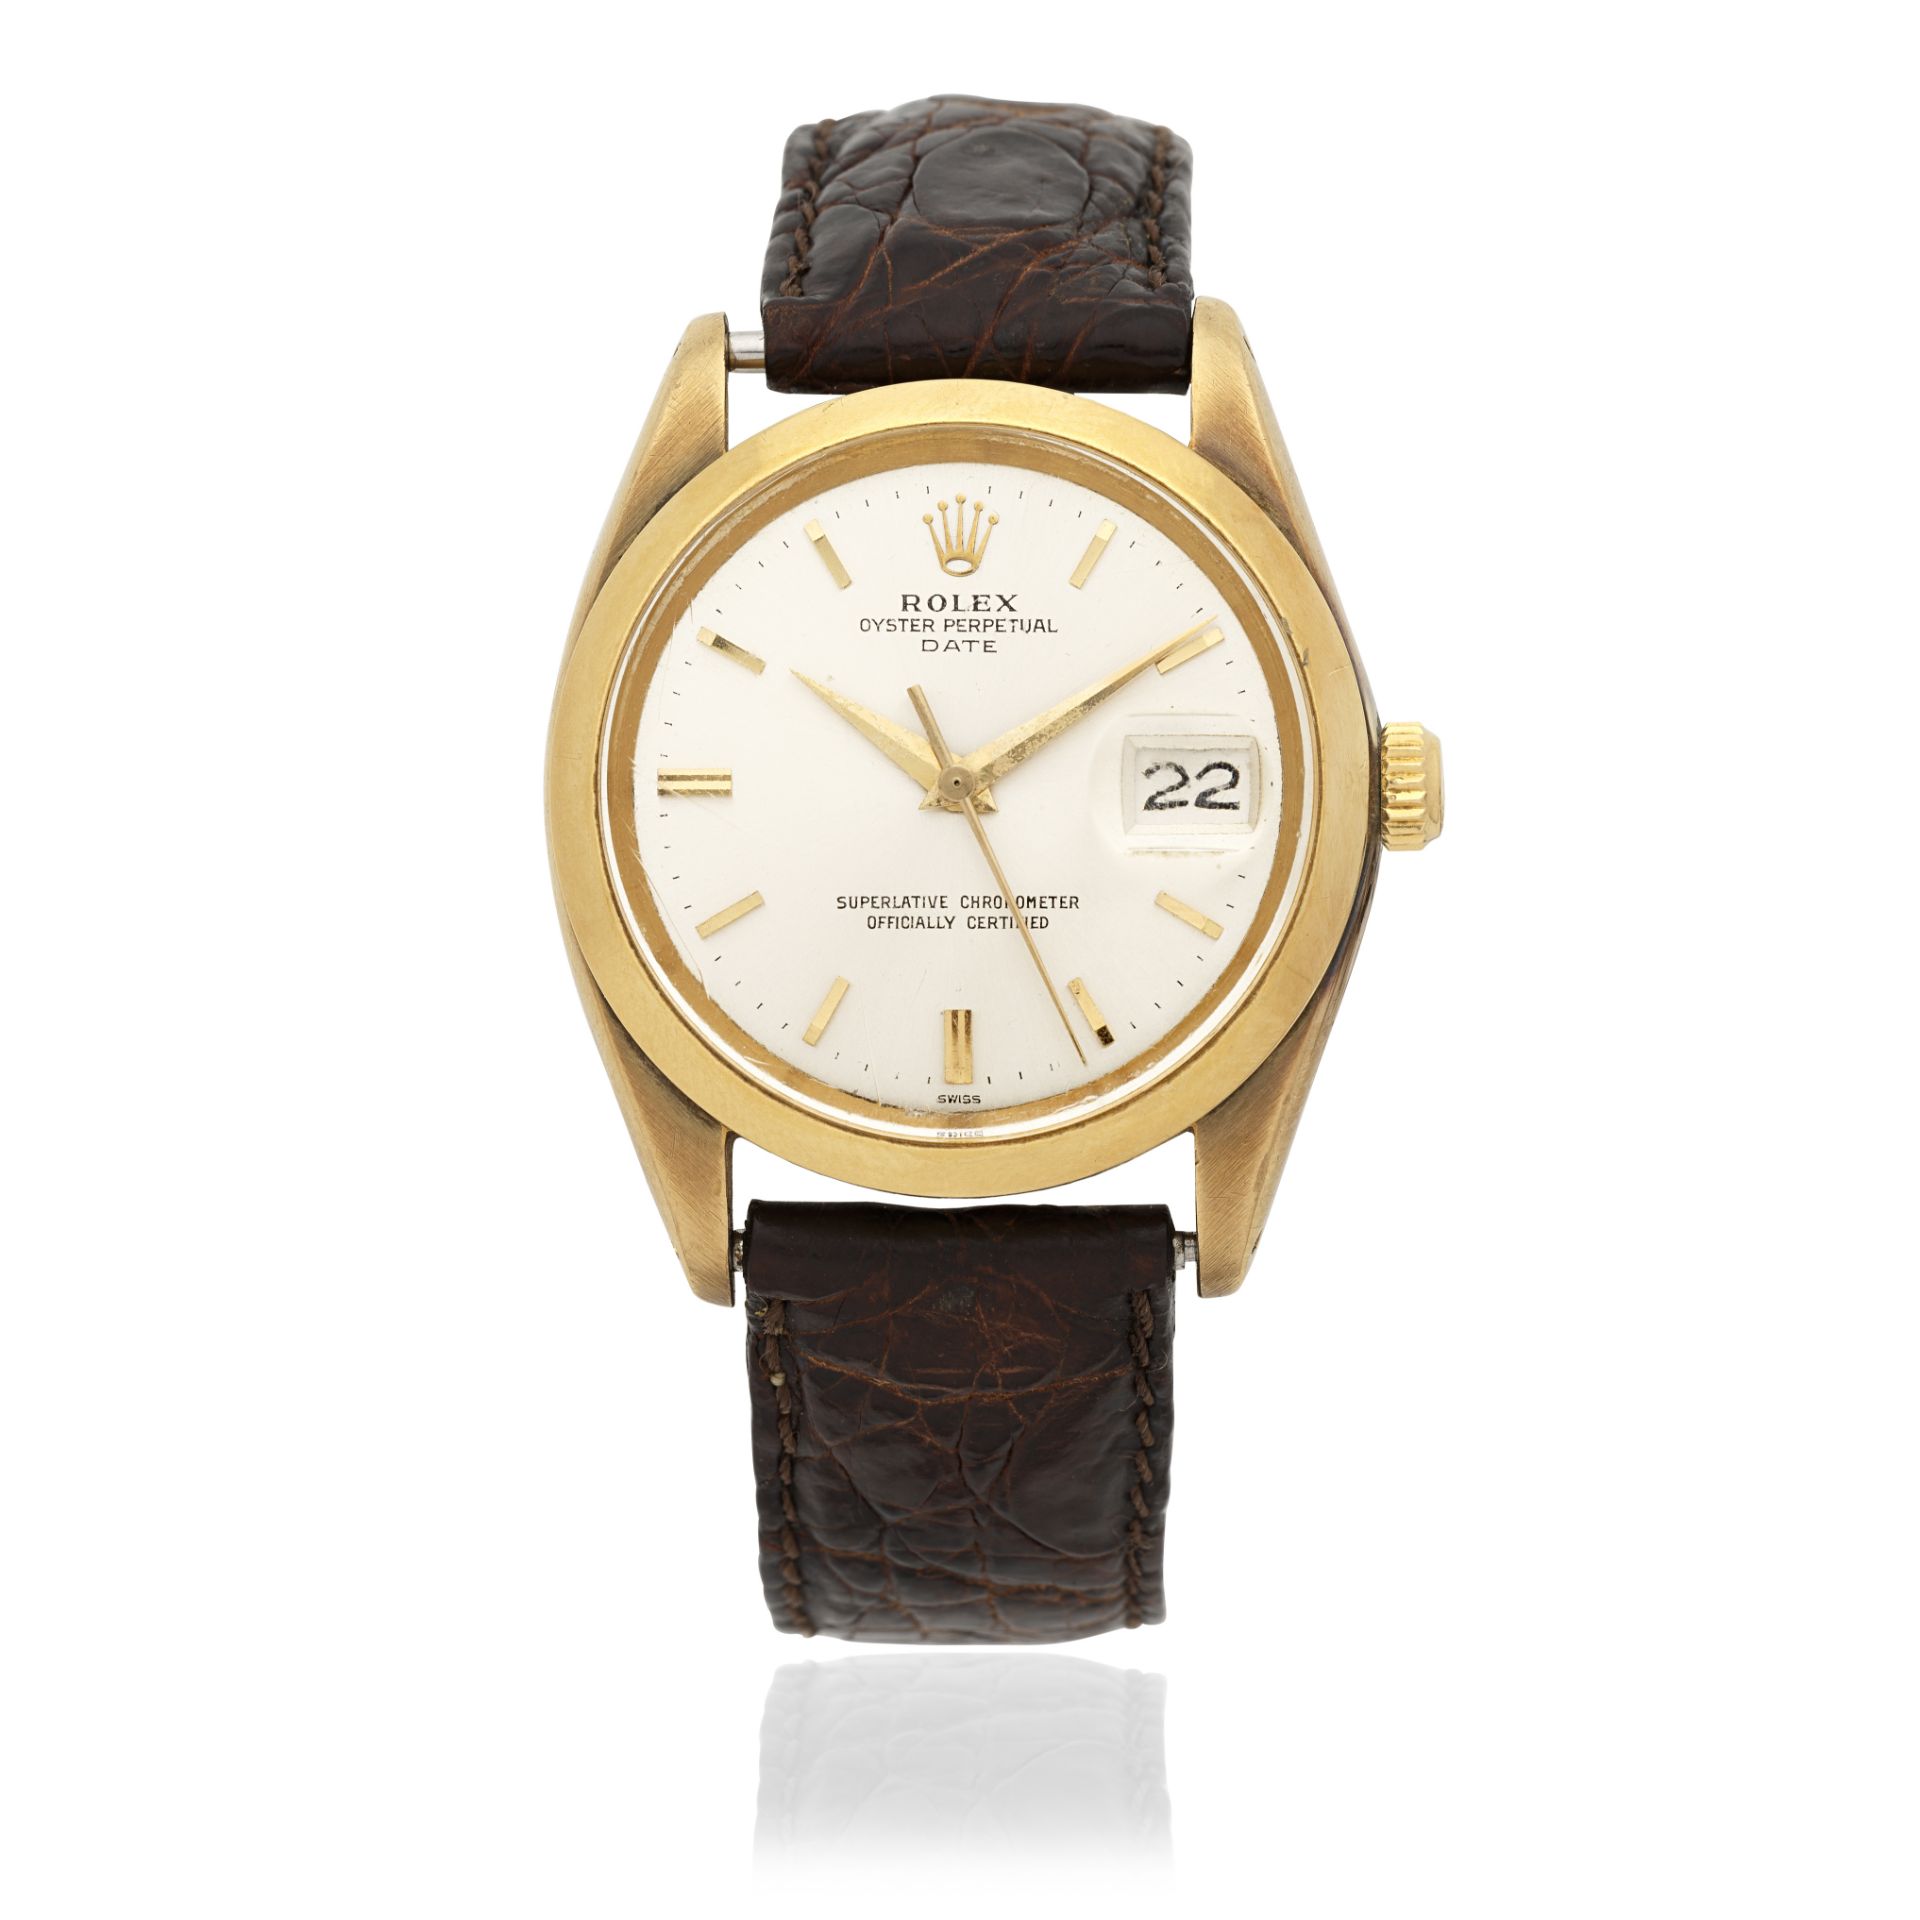 Rolex. A 9K gold automatic wristwatch offered on behalf of the original owner Date, Ref: 1500, ...